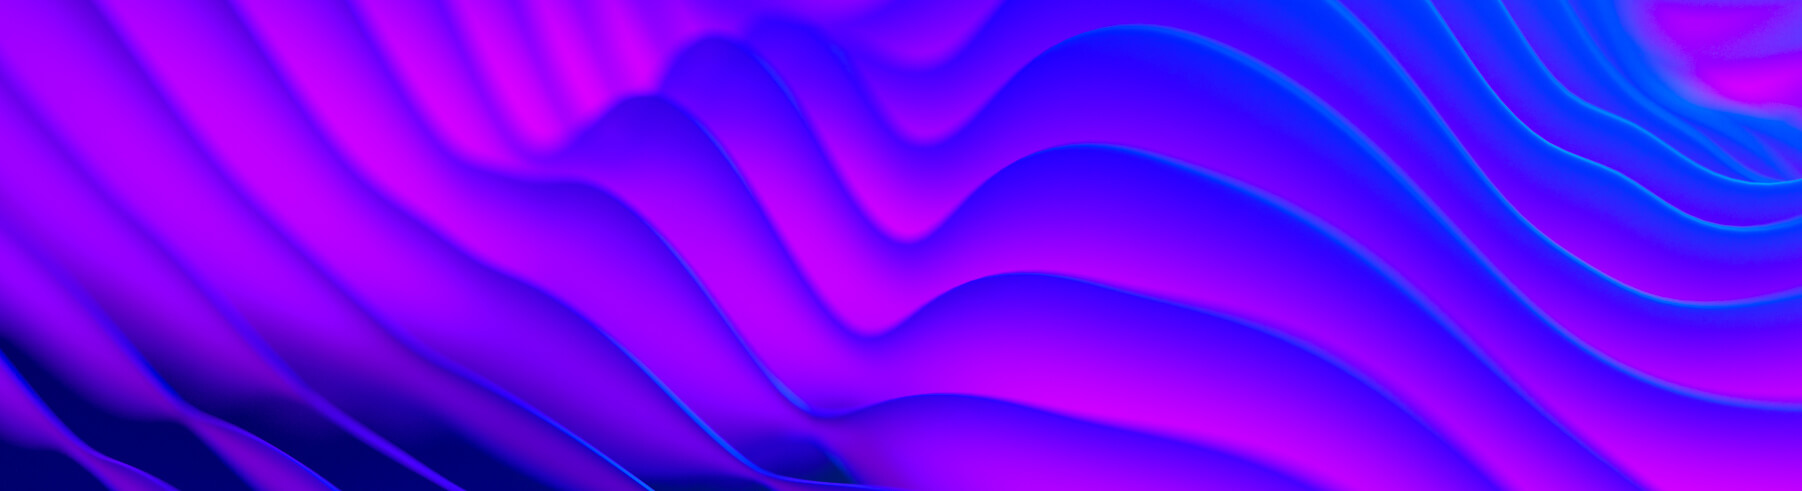 Background image featuring purple and blue waves